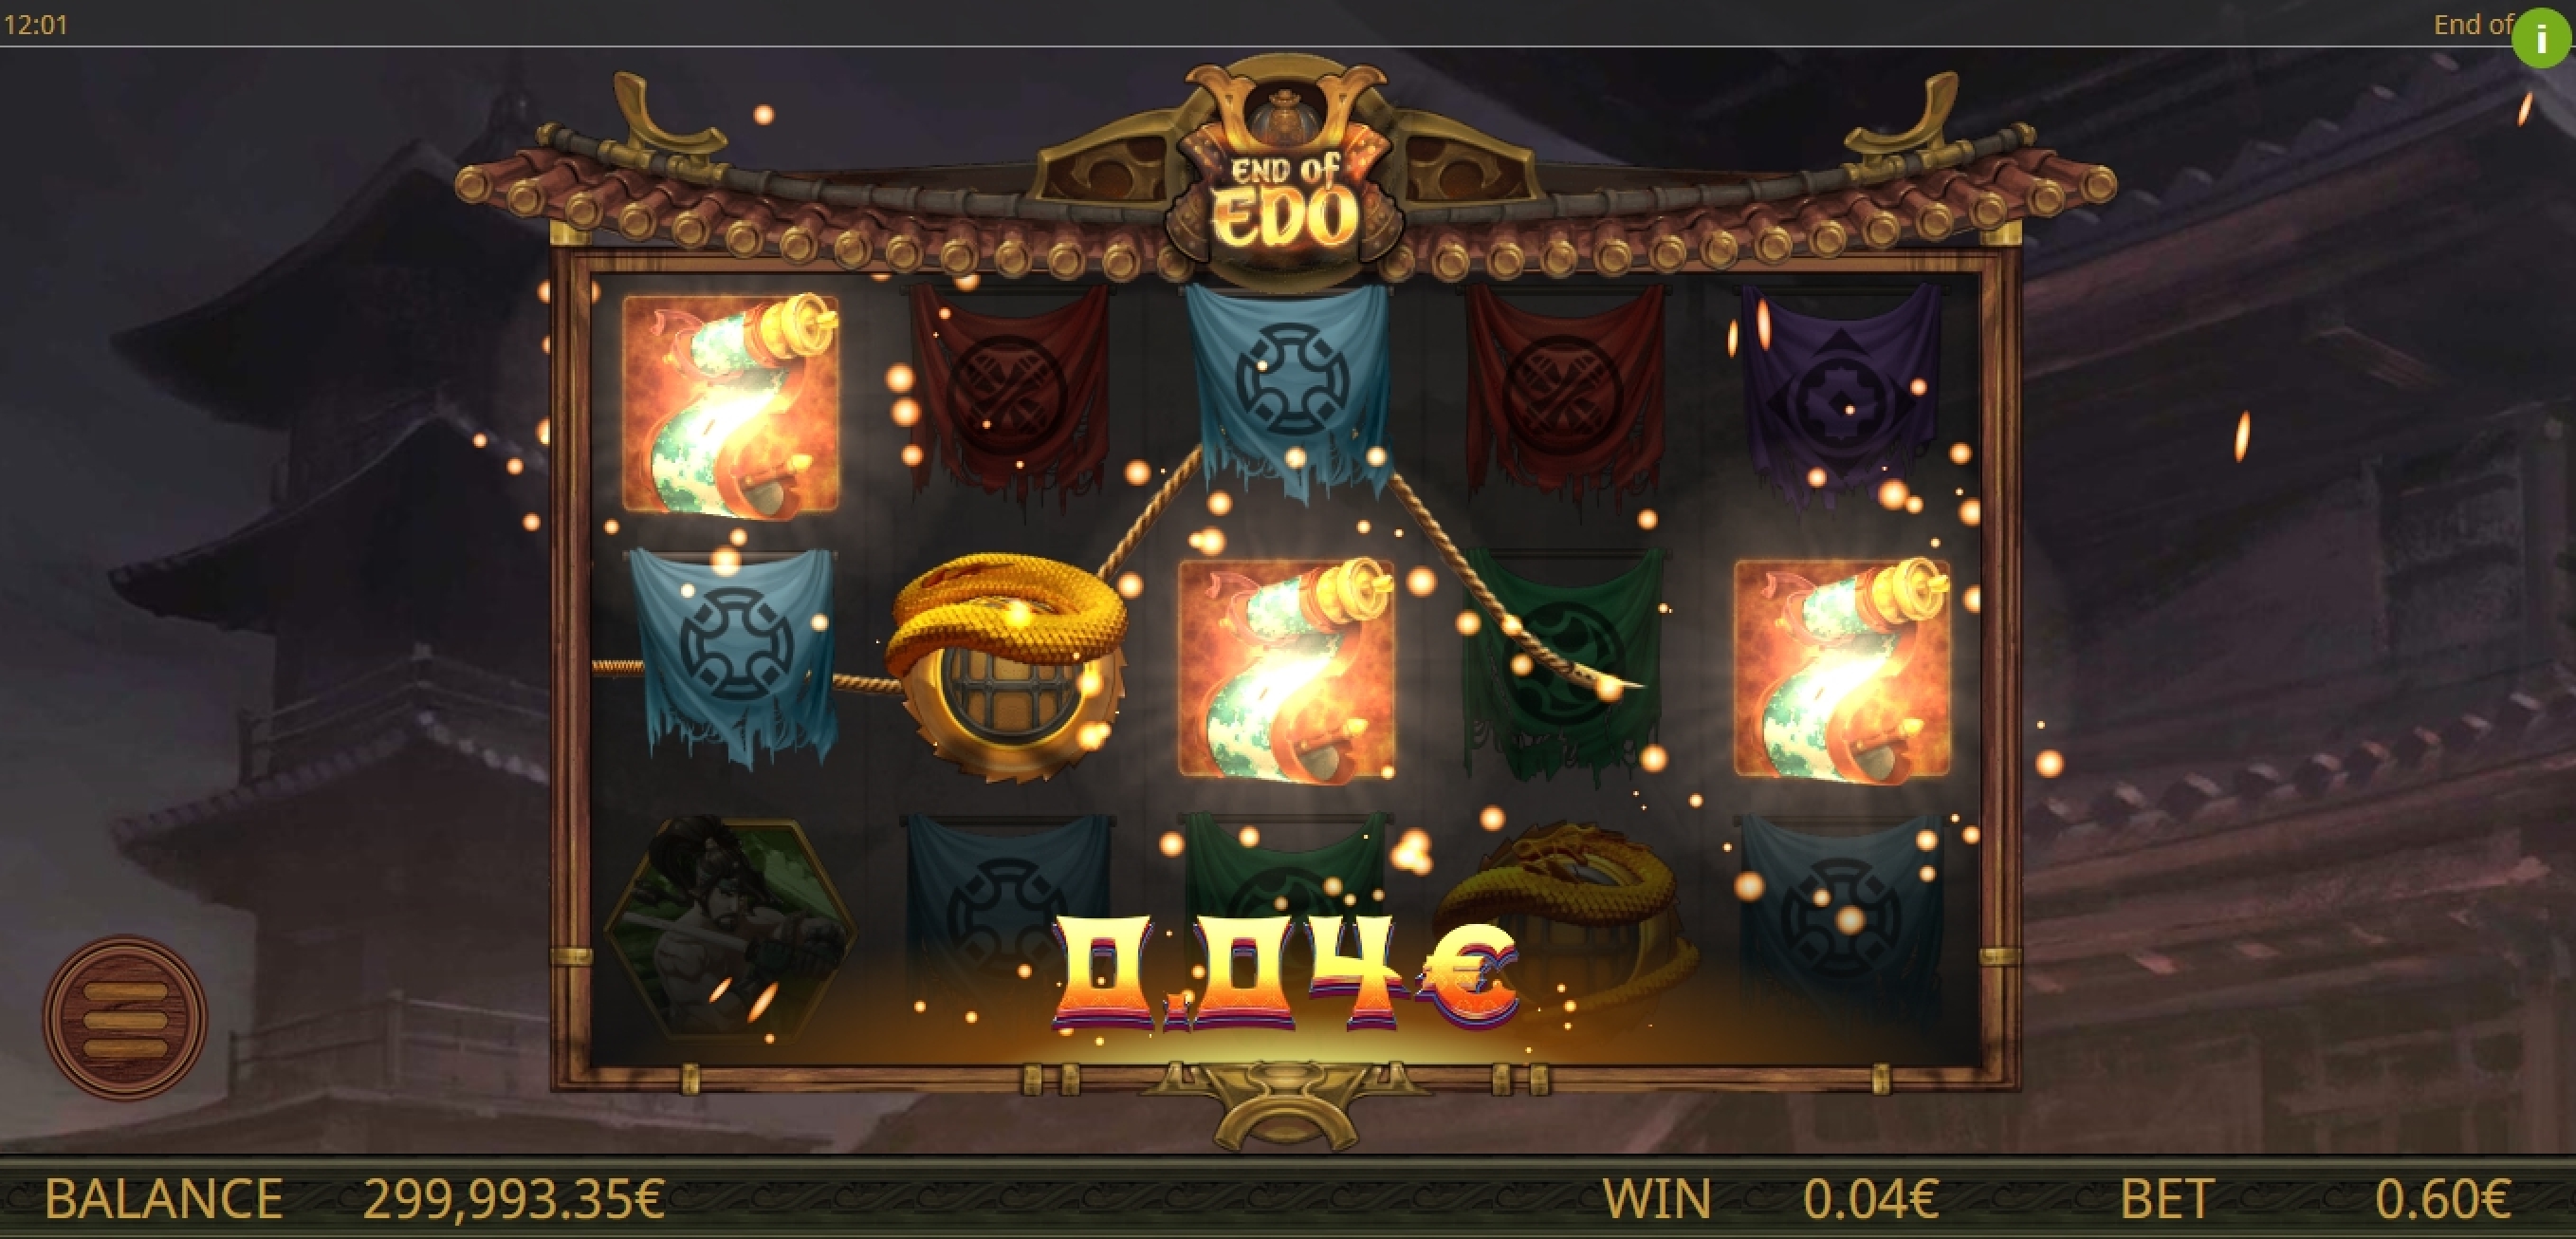 Win Money in End of Edo Free Slot Game by Ganapati